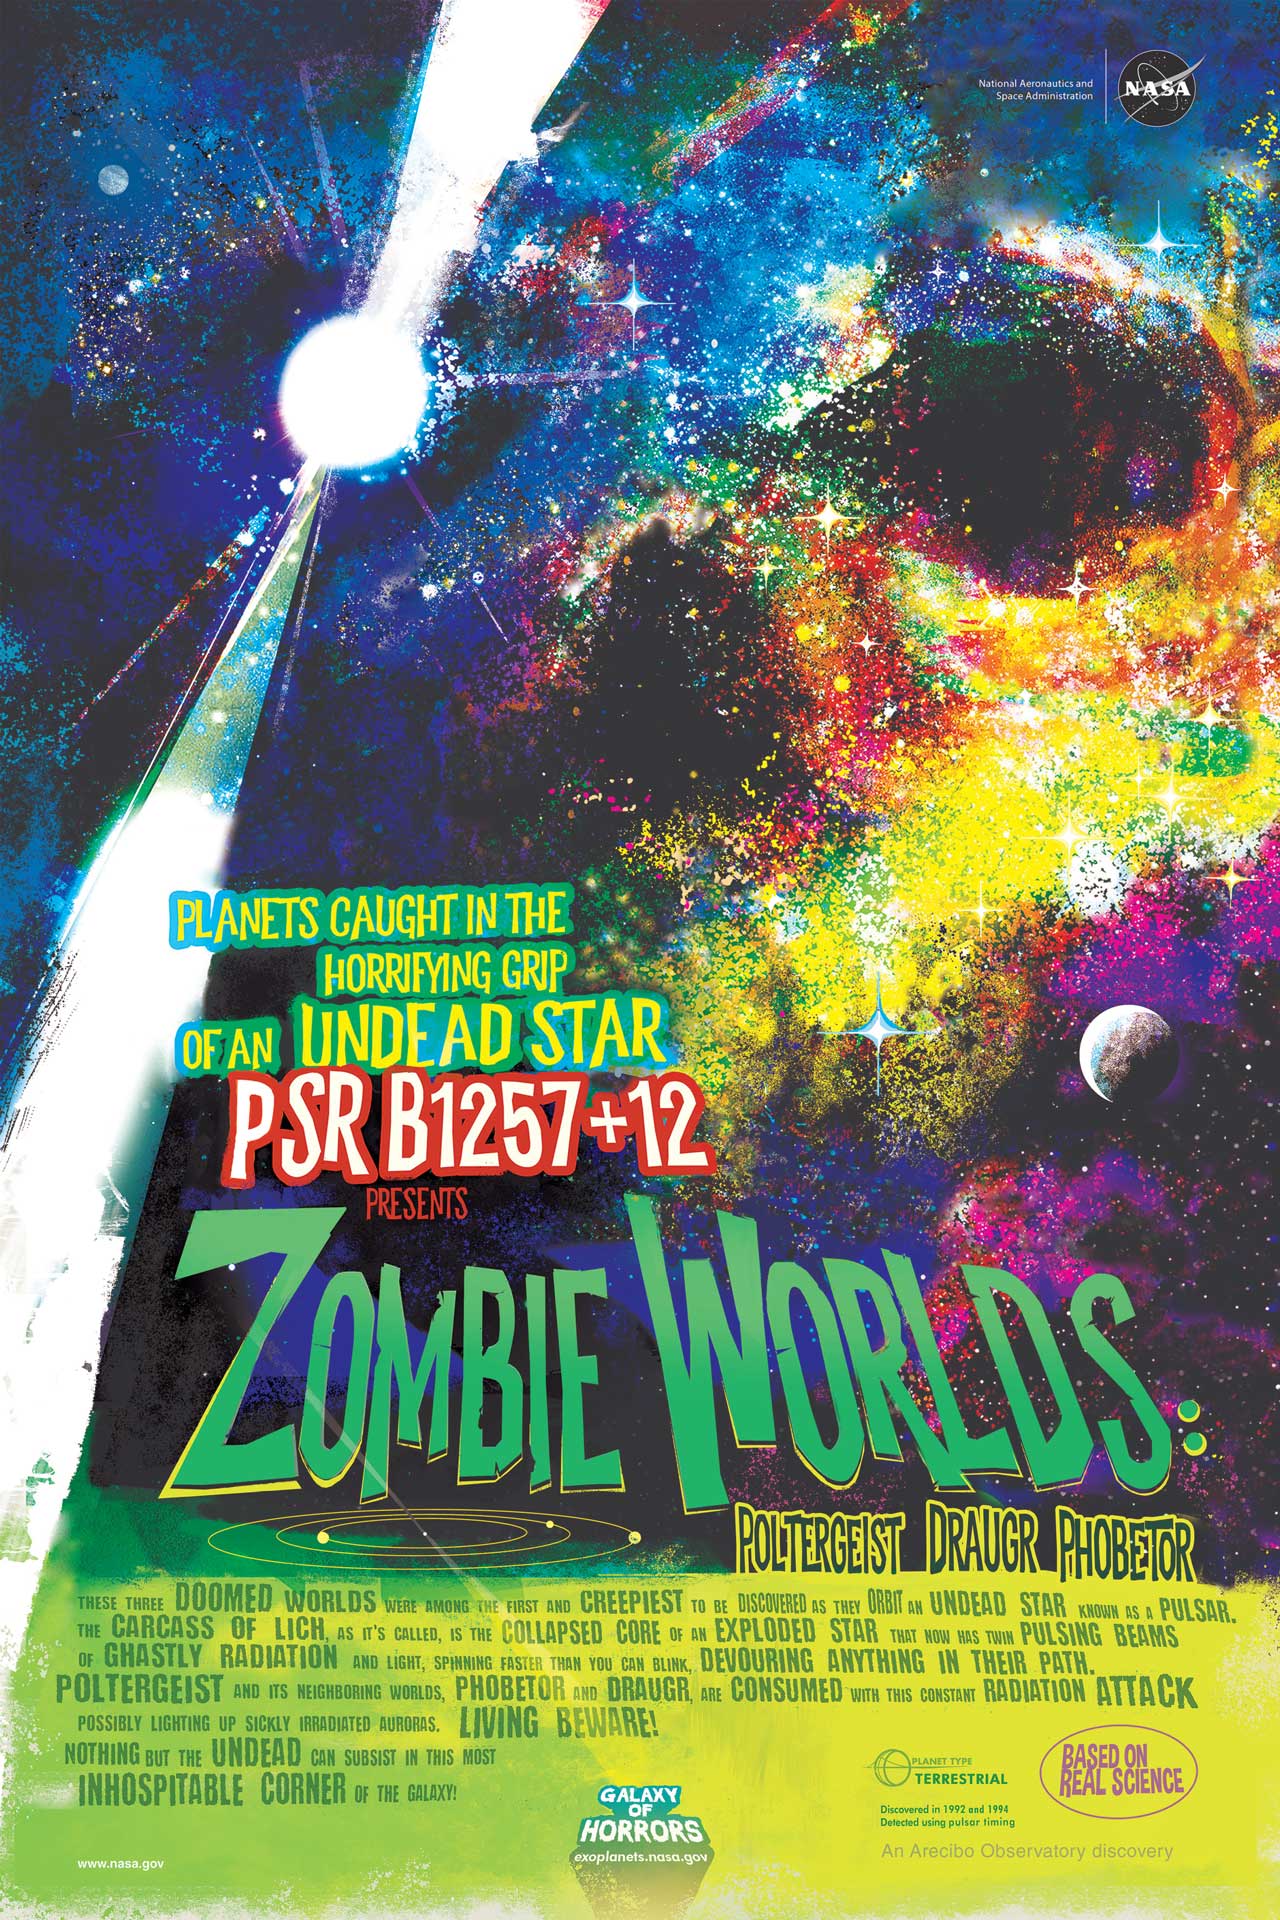 A poster done in the style of movie posters from the 1950s and 1960s showing the zombie worlds with a colorful nebula and a planet being blasted by twin beams of radiation by the pulsar host star. The overall image creates the look of a scary skull.